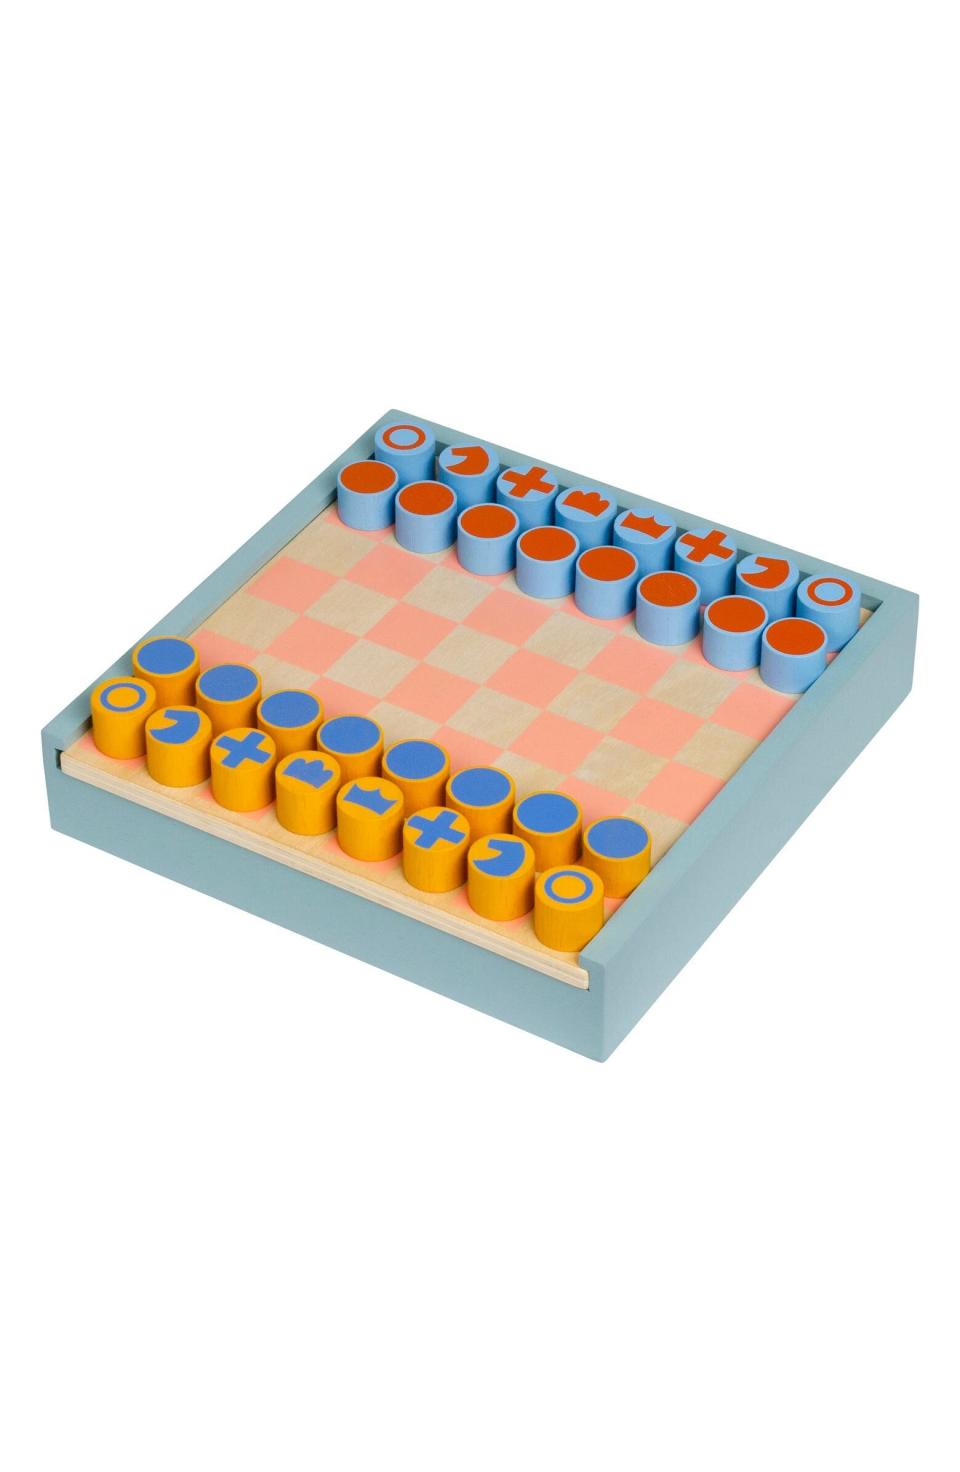 Now you don't have to switch pieces to play a game of checkers when you're done with chess. These practical pieces flip over. The wooden box also acts as storage. We're sure there will be lots of <i>colorful</i> games played on it. <a href="https://fave.co/3g4clzQ" target="_blank" rel="noopener noreferrer">Find it for $55 at Nordstrom</a>.